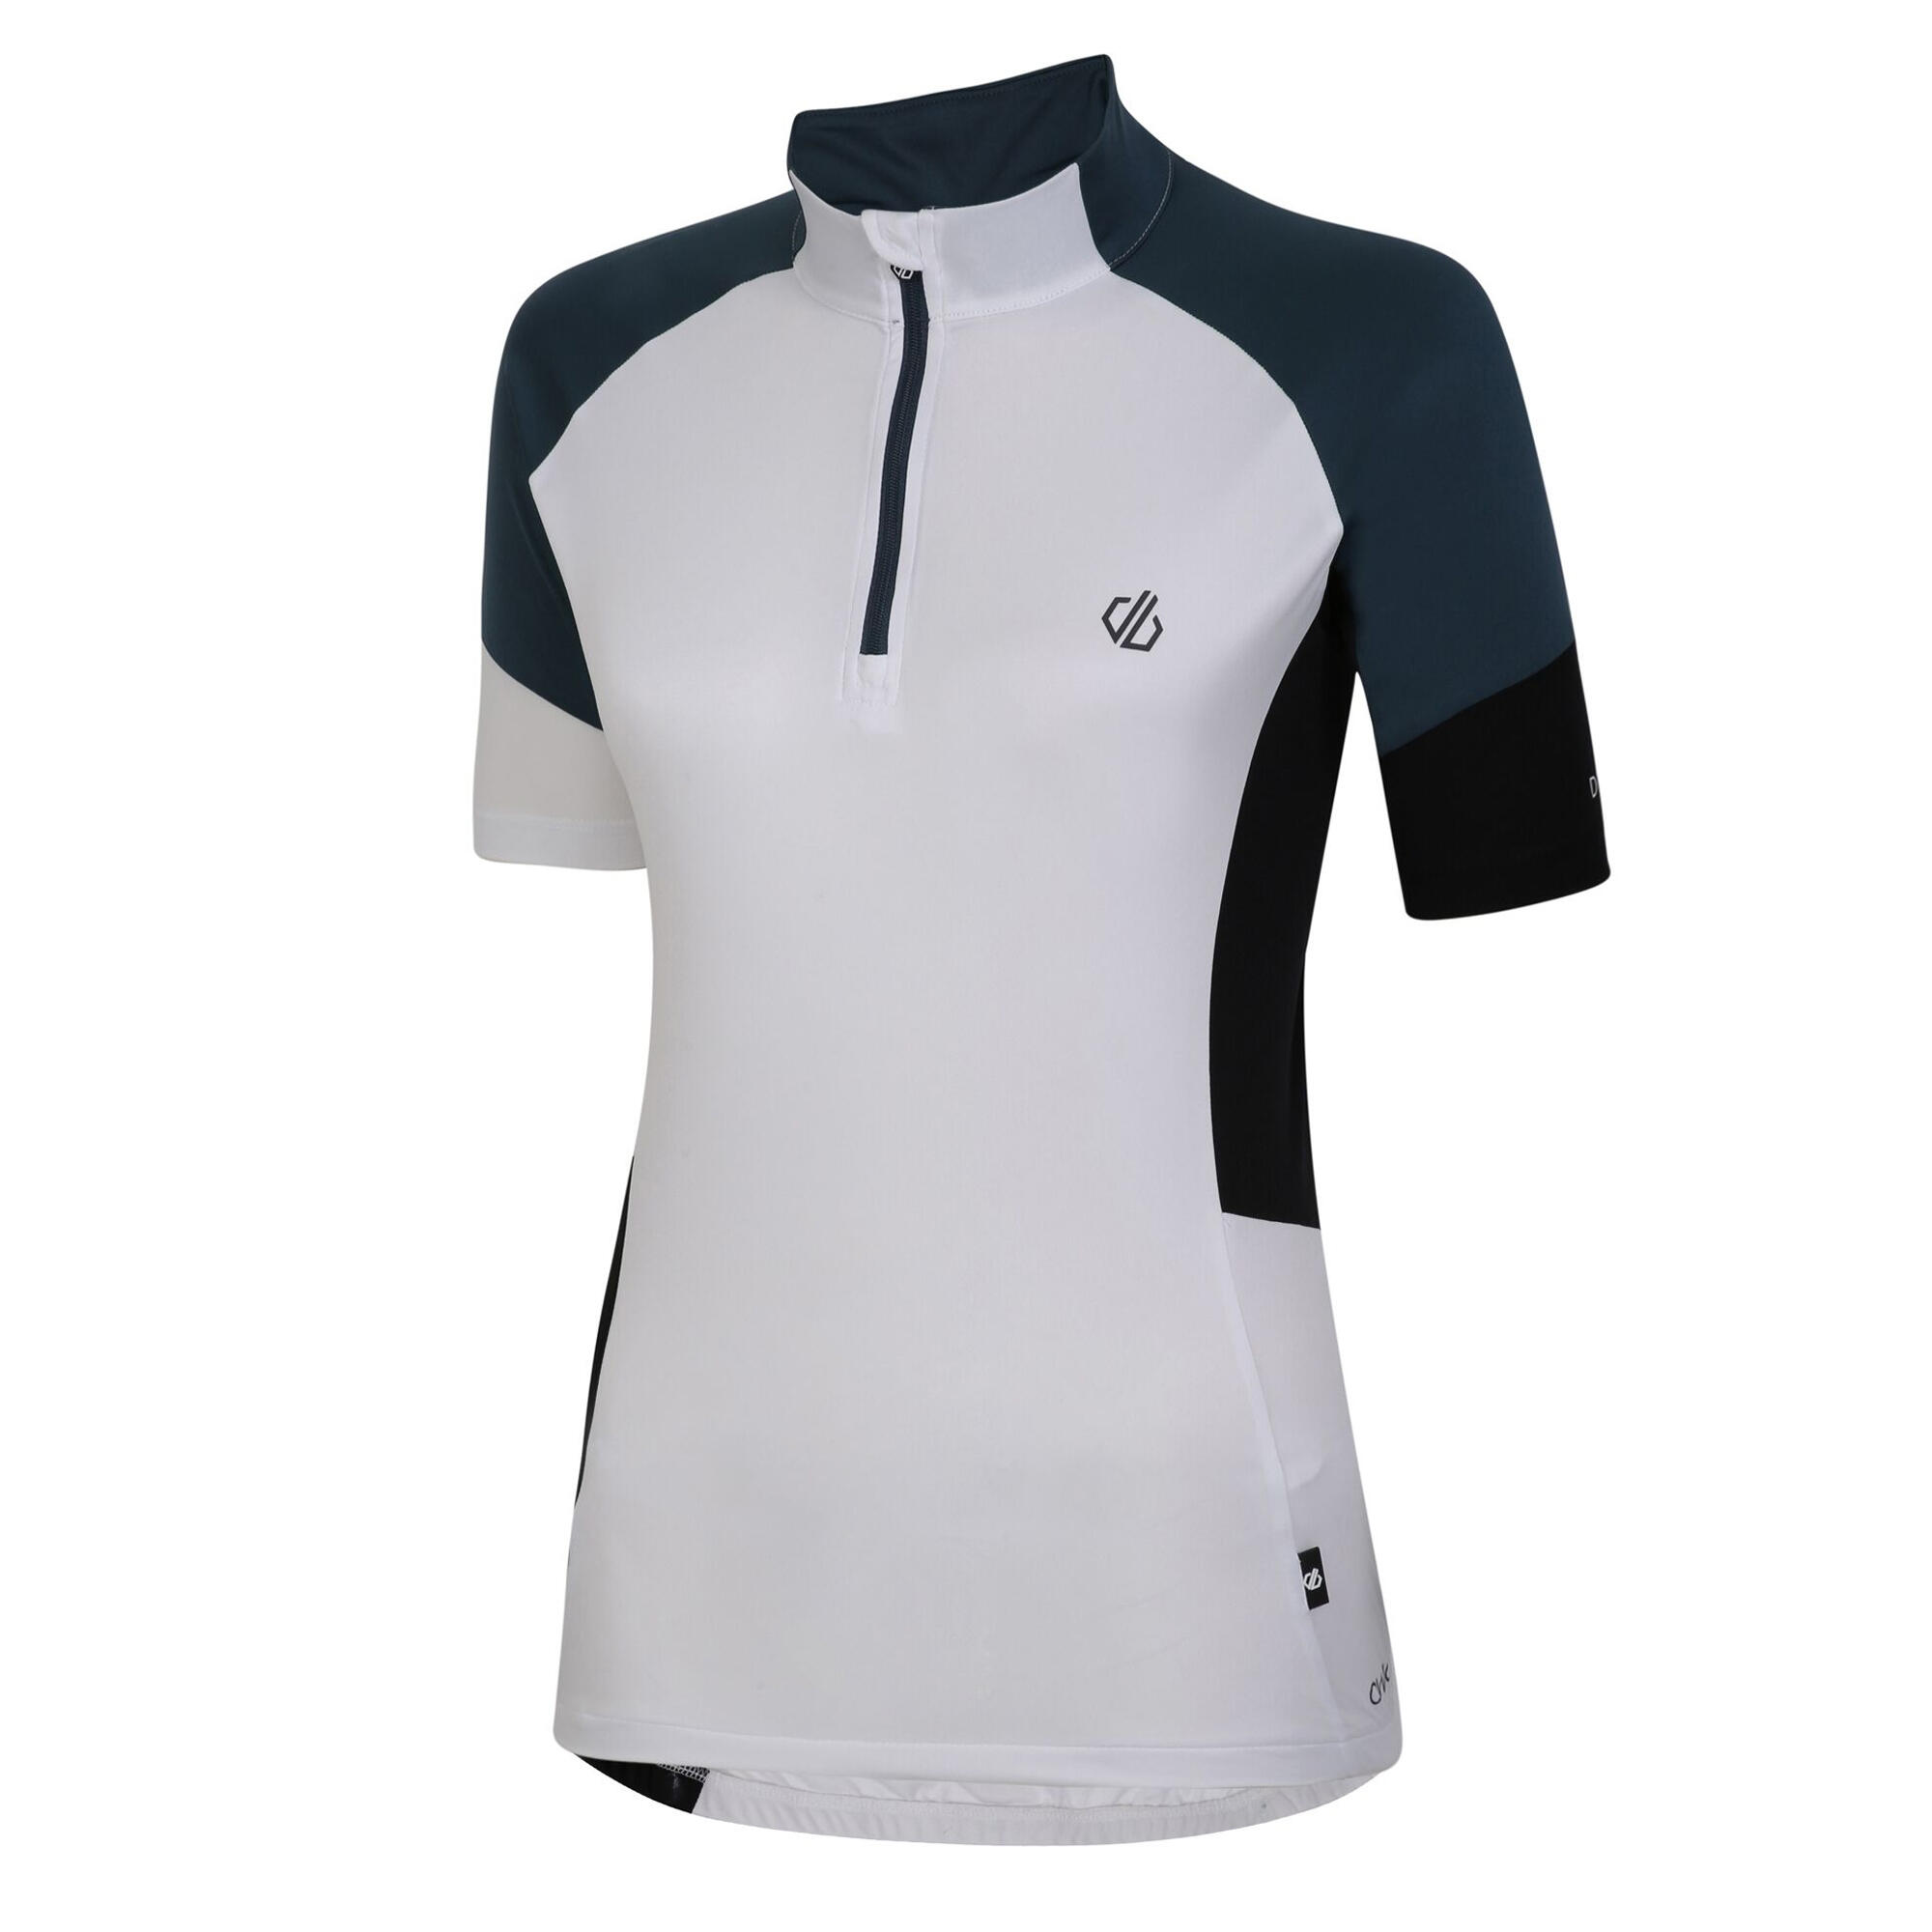 Womens/Ladies Compassion II Lightweight Jersey (White/Orion Grey) 3/4